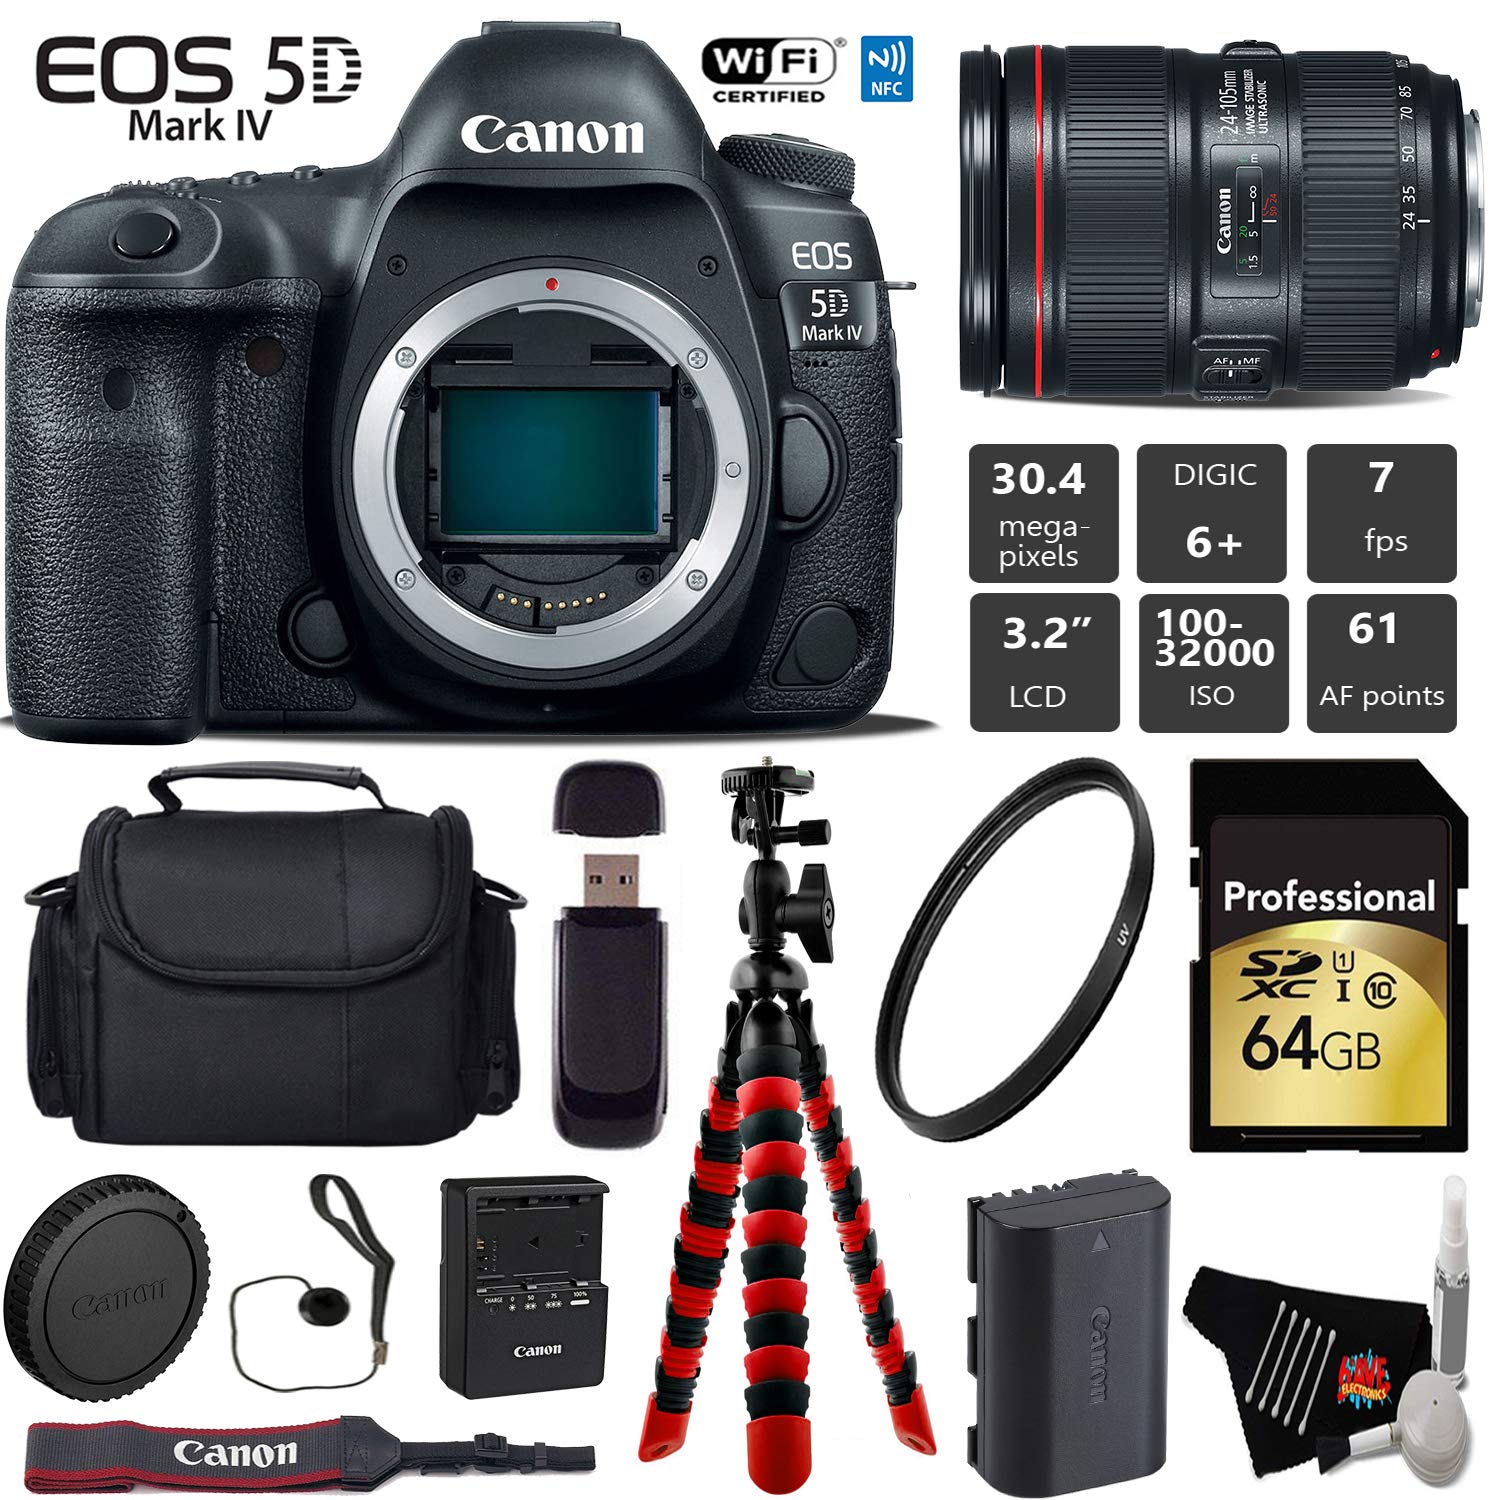 Canon EOS 5D Mark IV DSLR Camera with 24-105mm f/4L II Lens + Wireless Remote + UV Protection Filter + Case Pro Bundle